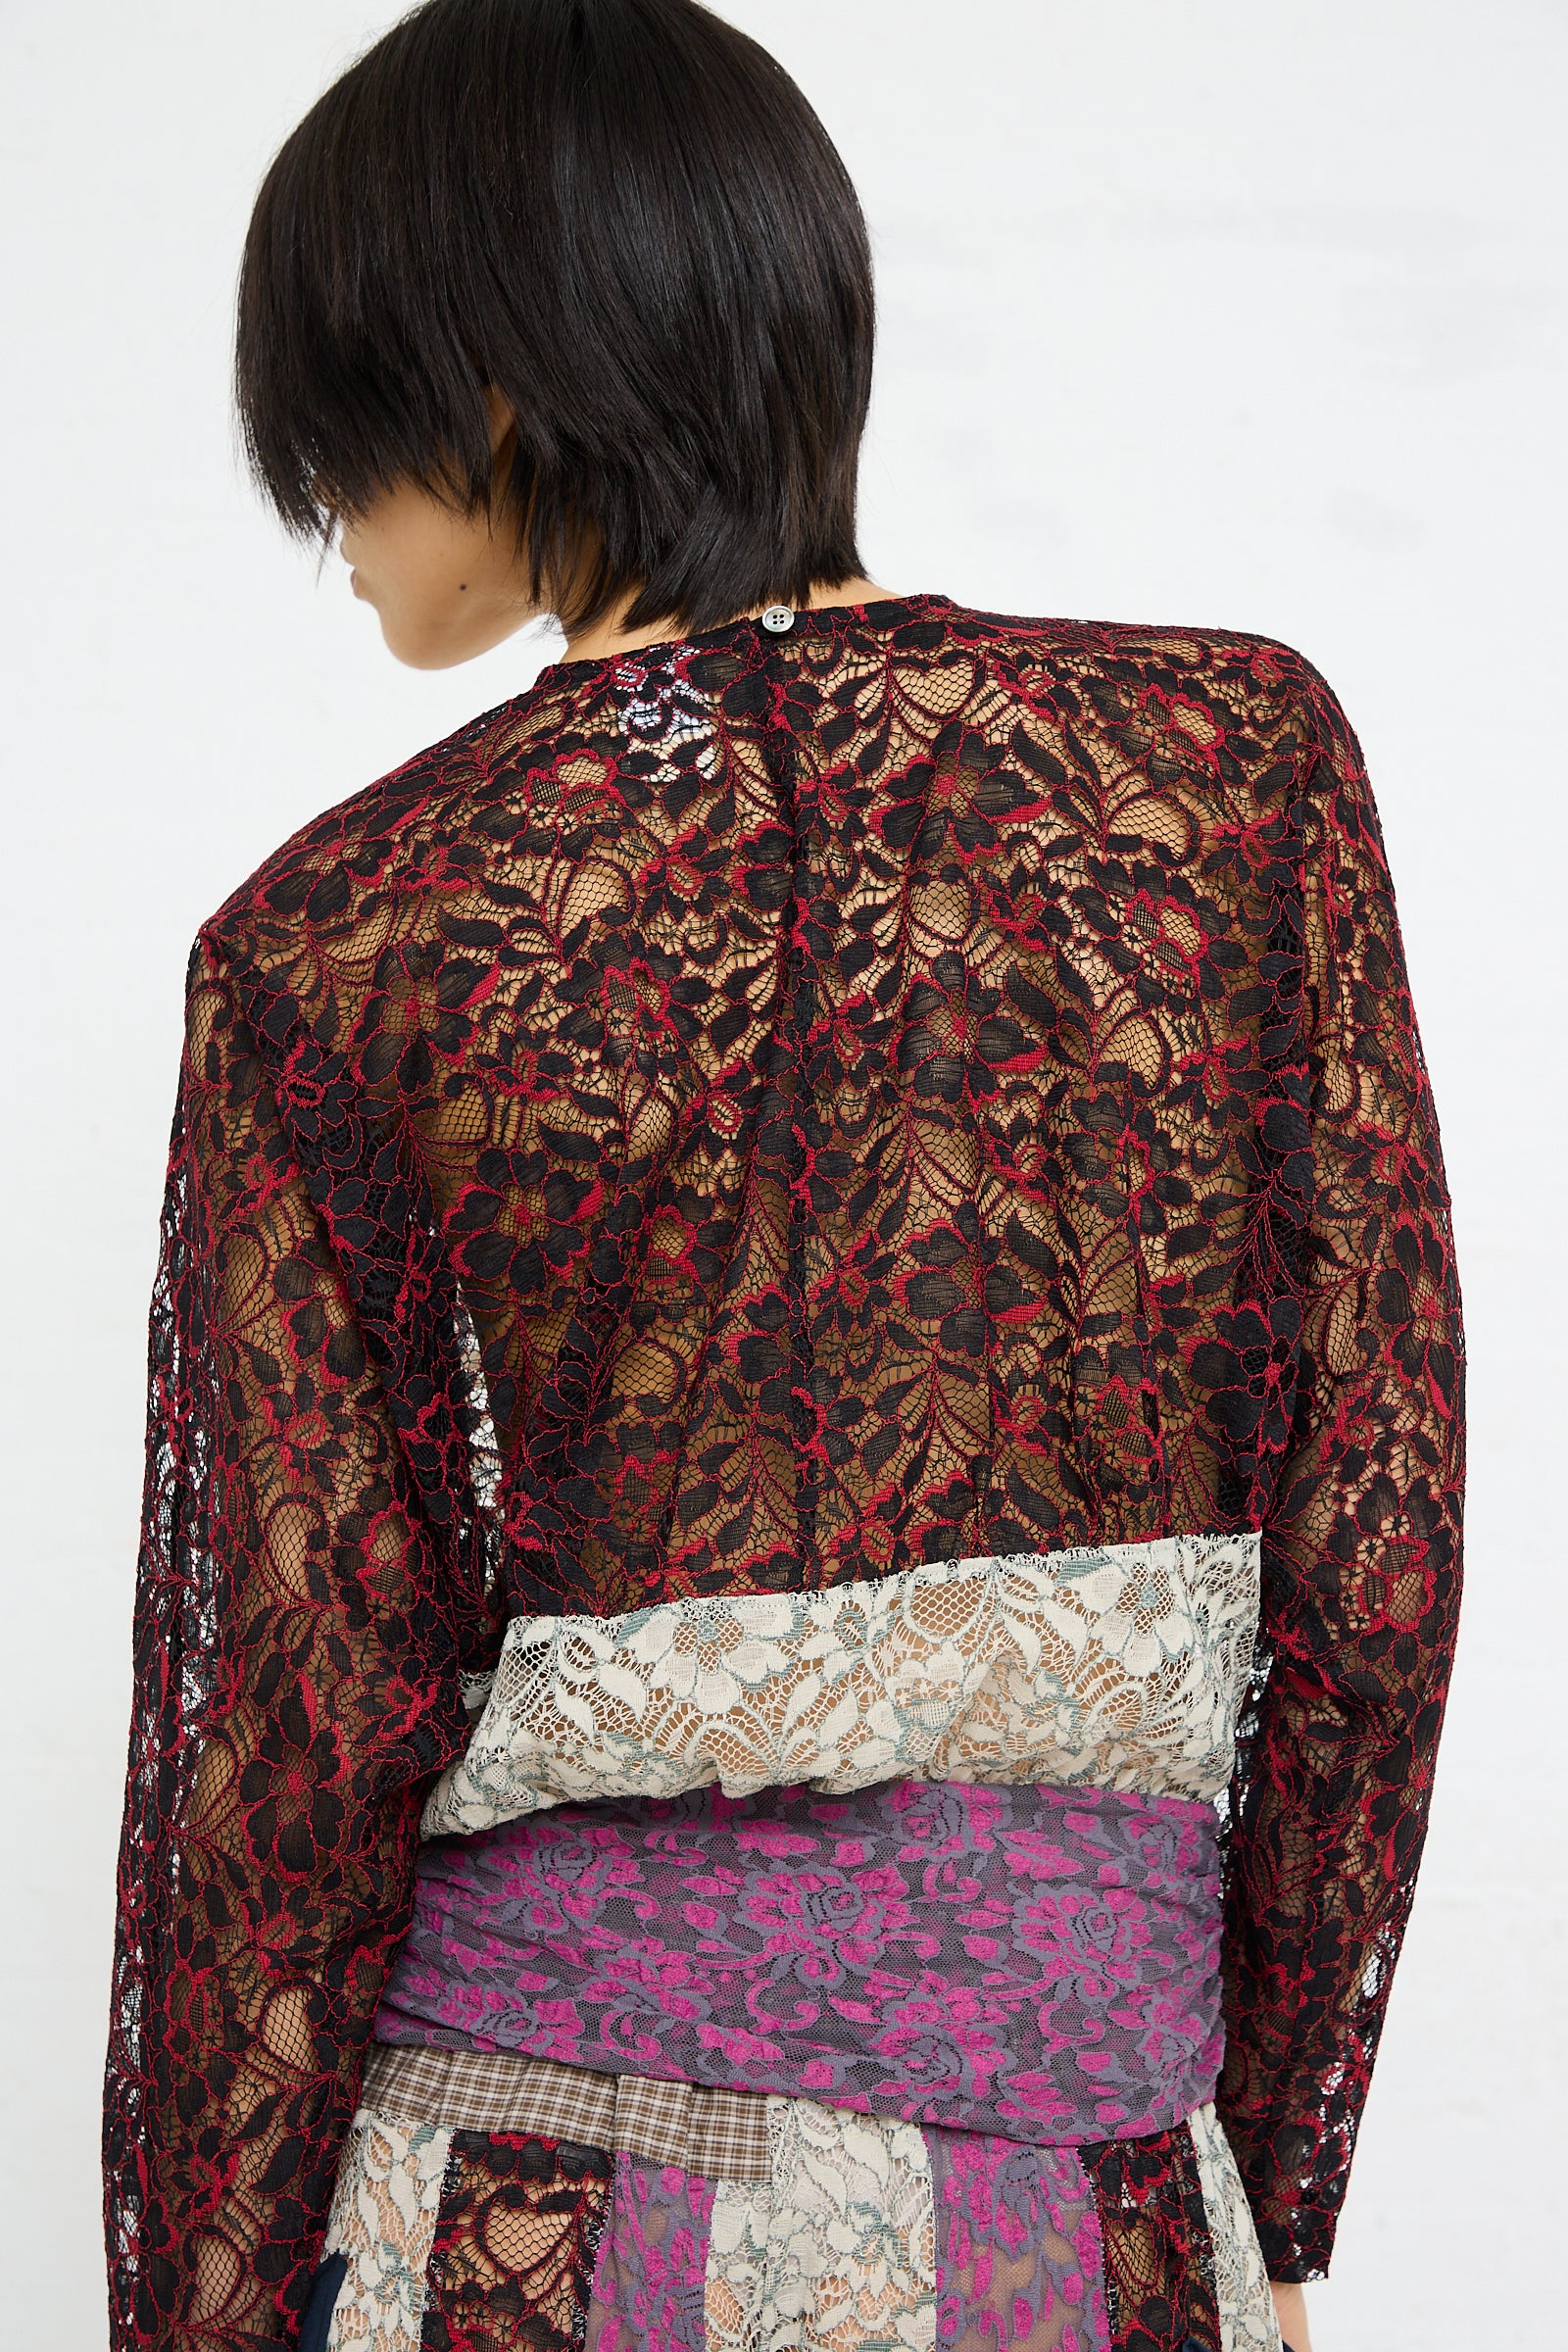 A person seen from the back wearing a SC103 Lace Ritual Top in Thrash with a patchwork skirt.